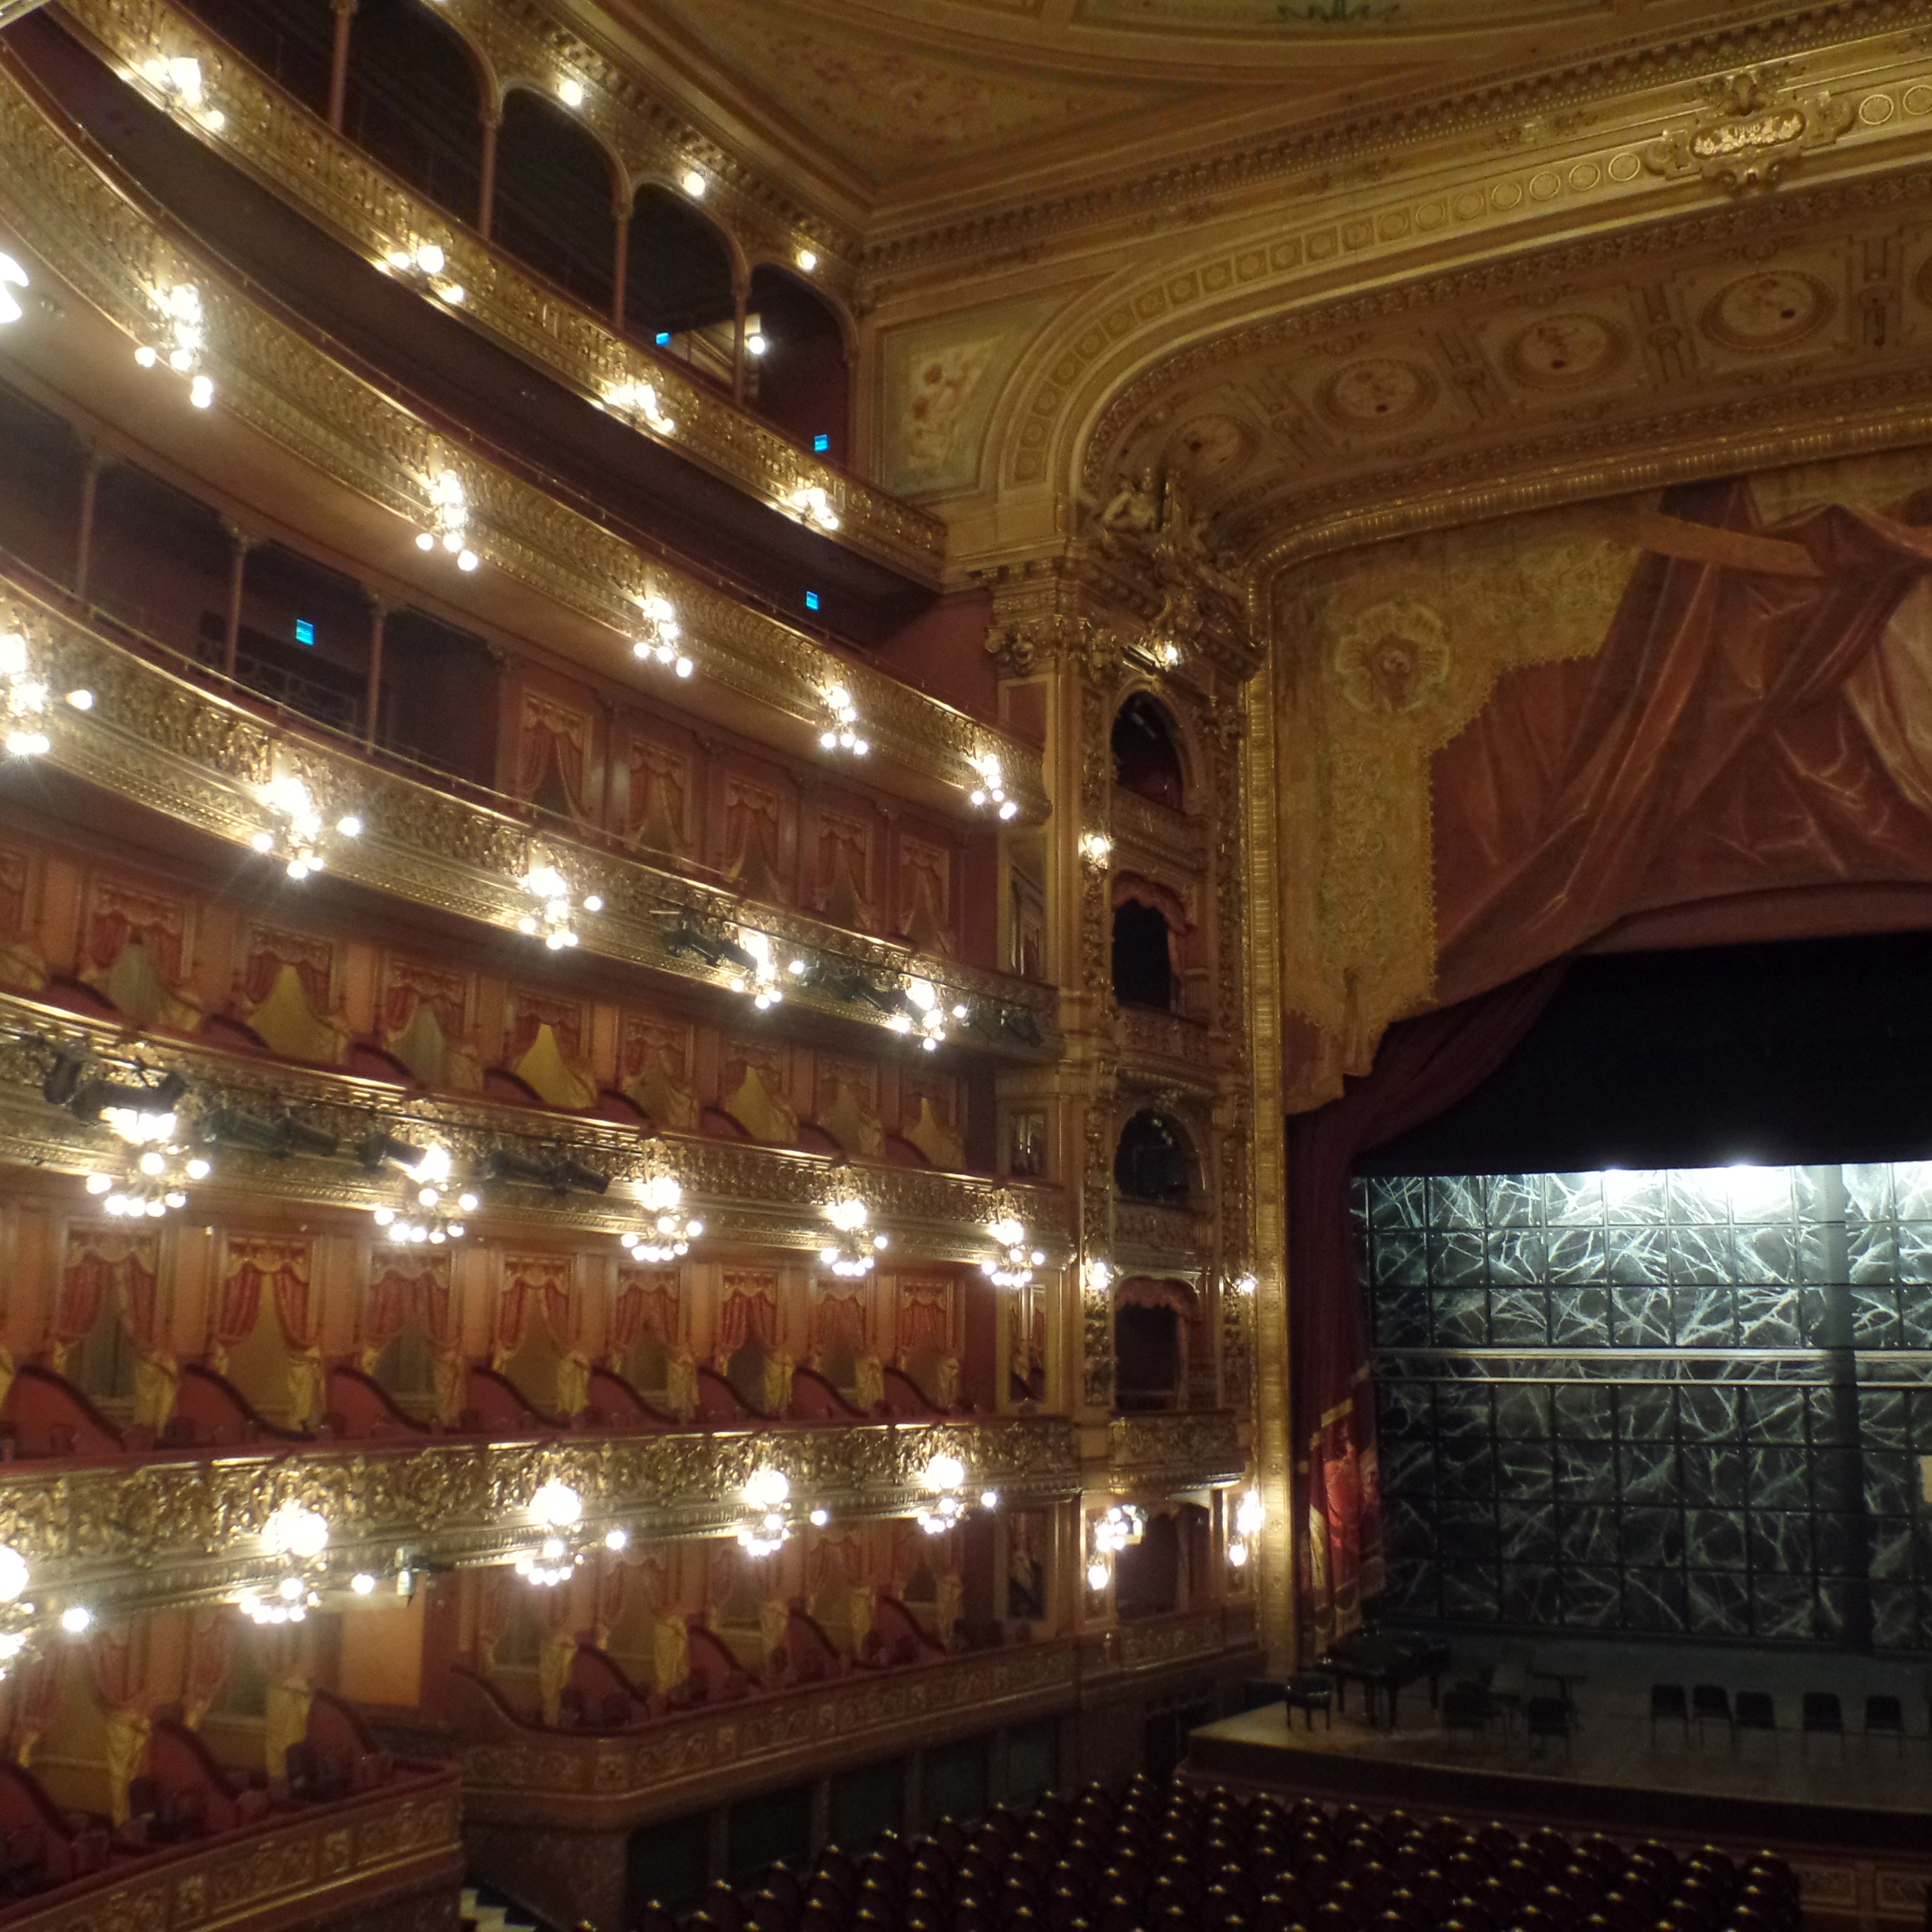 Colon theater Opera House, Buenos Aires